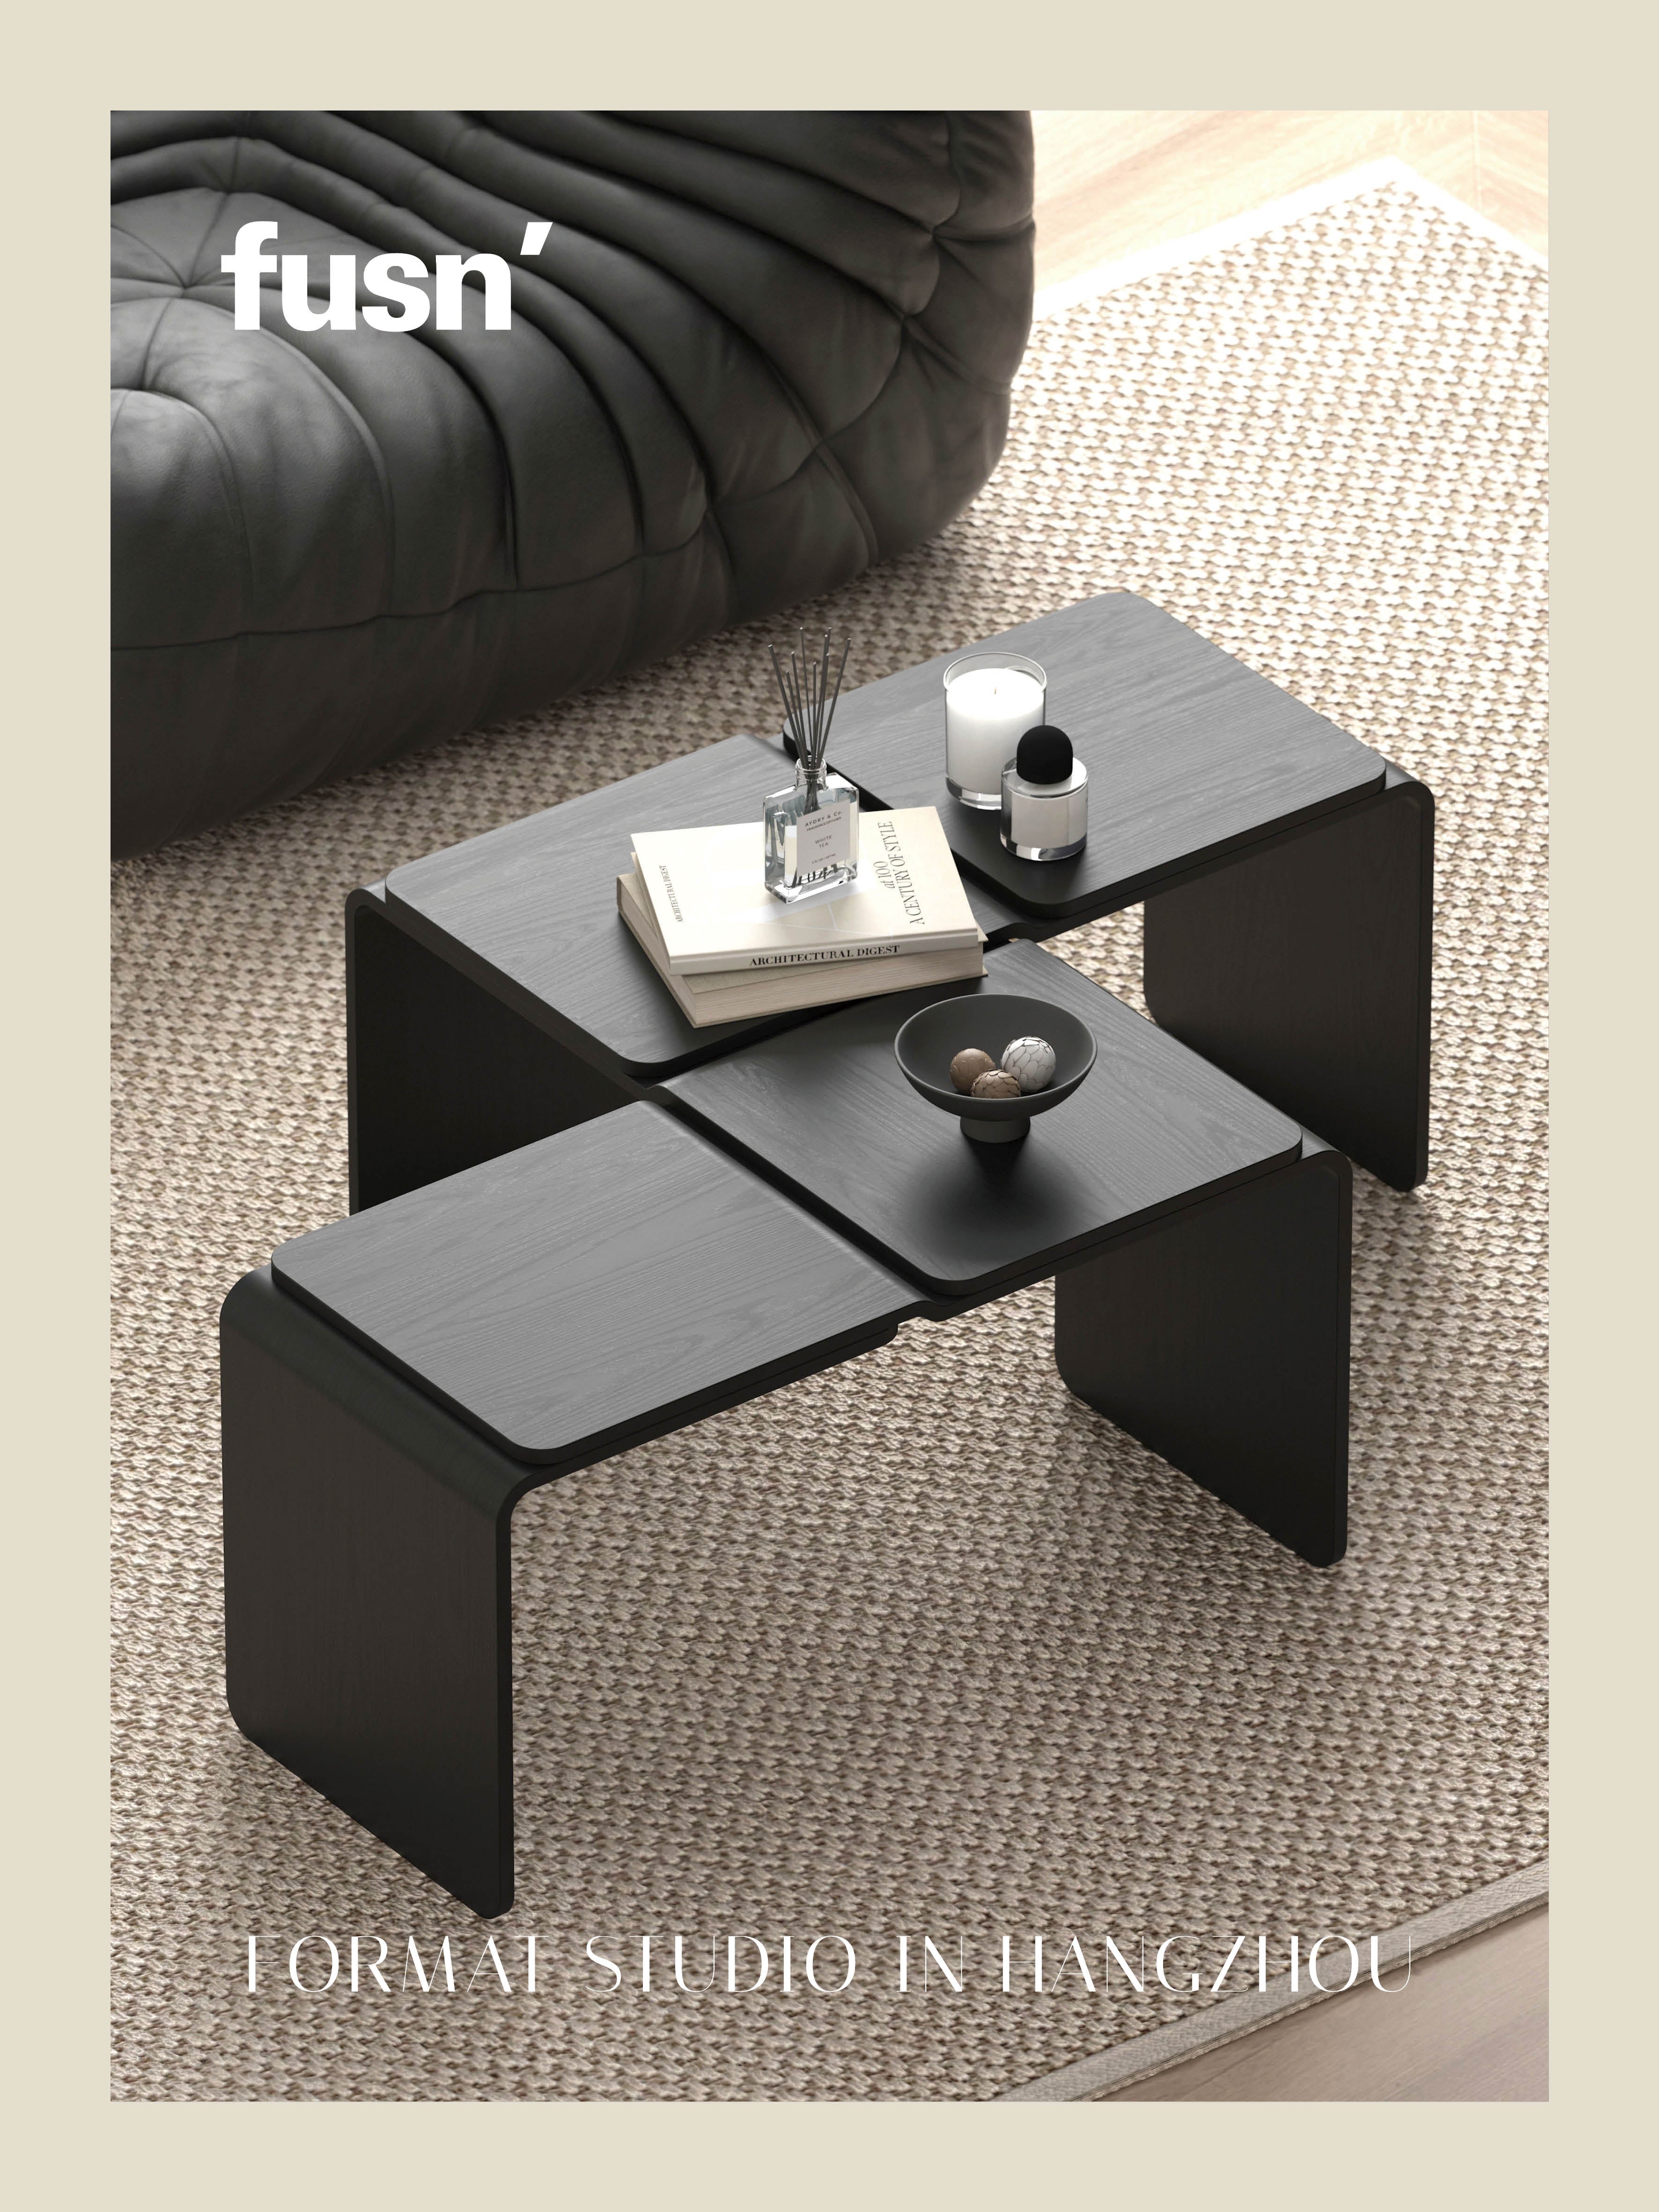 Bend Coffe Table Side Table 